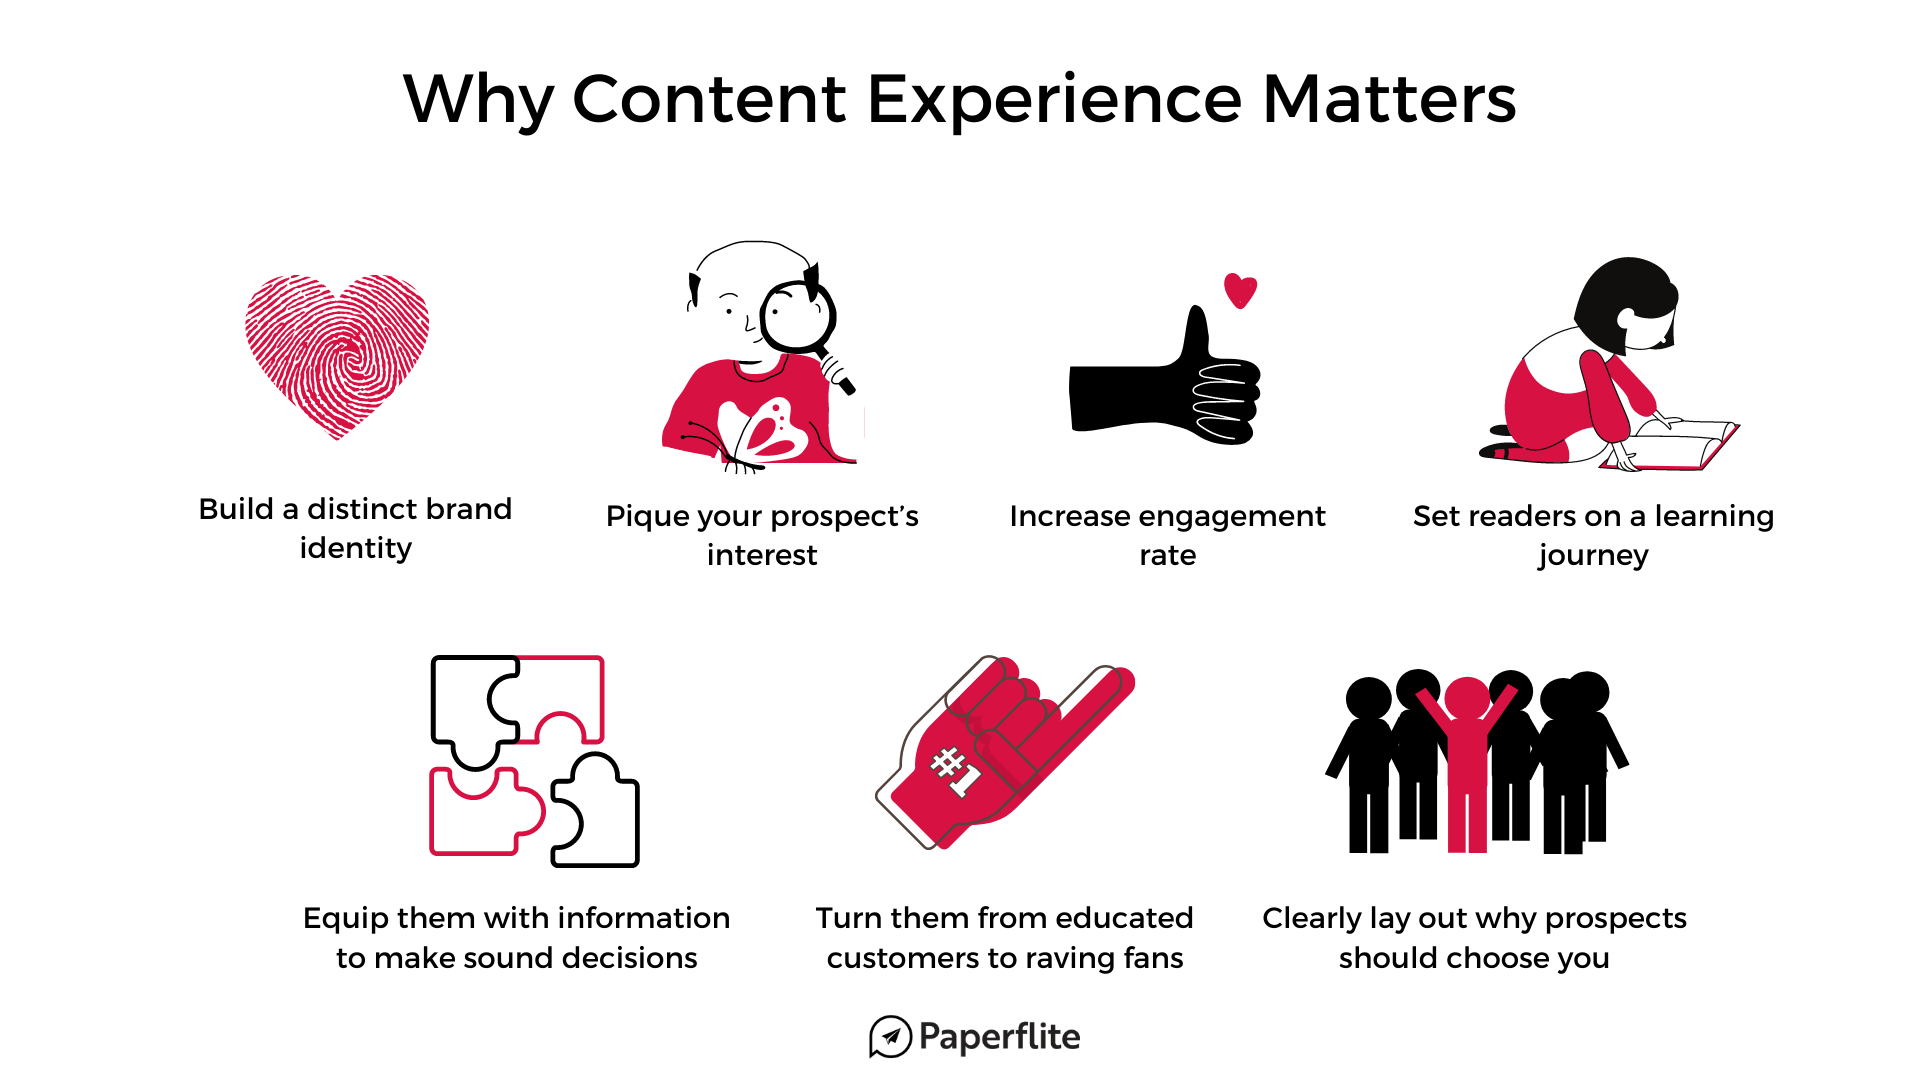 why content experience matters_paperflite_infographic